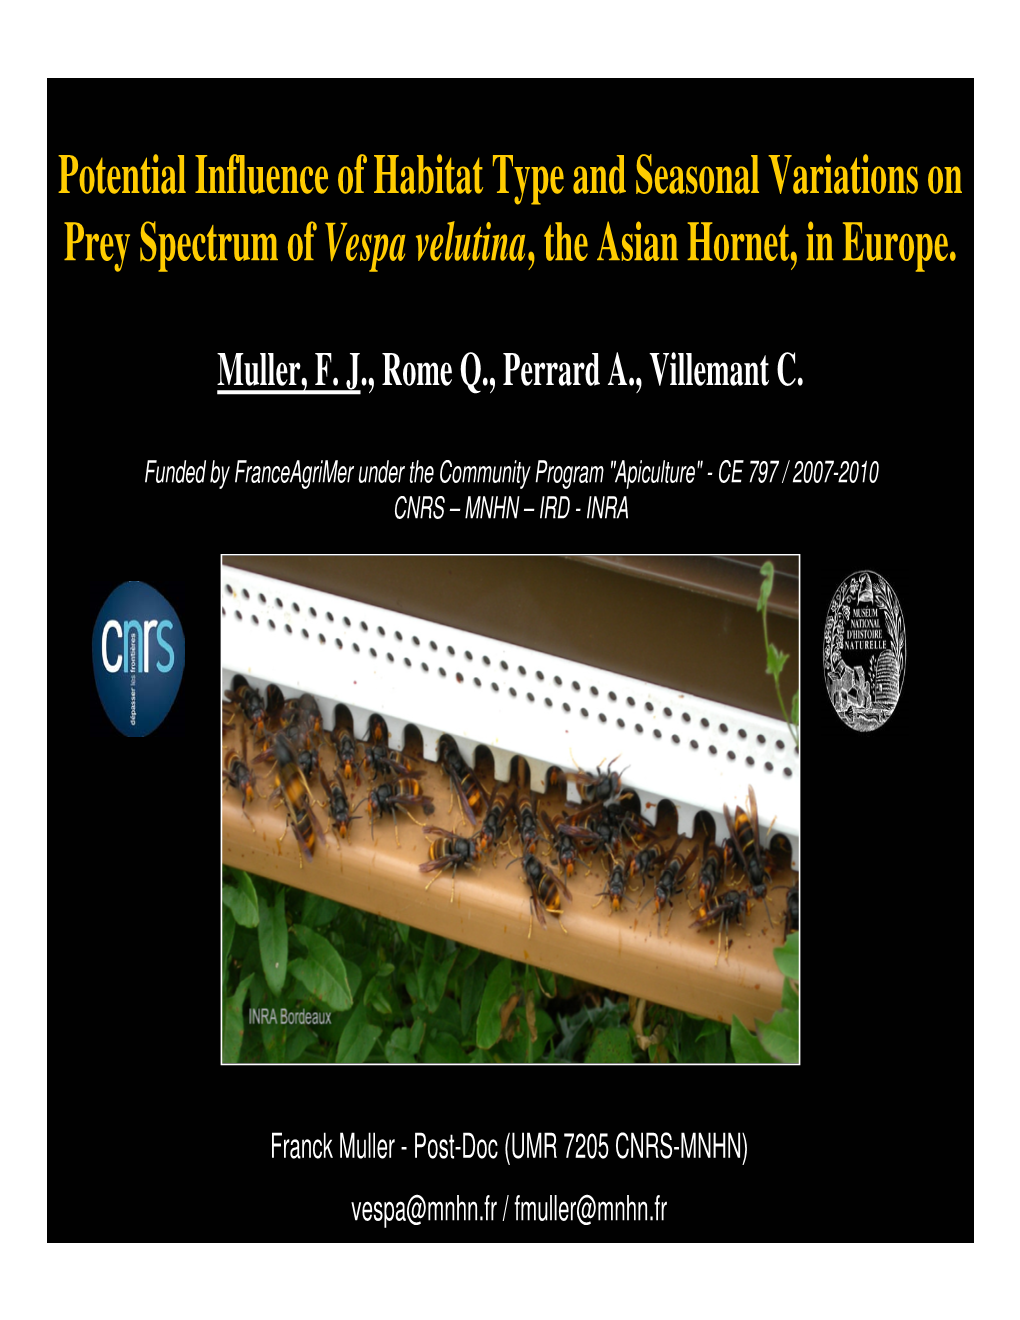 Potential Influence of Habitat Type and Seasonal Variations on Prey Spectrum of Vespa Velutina, the Asian Hornet, in Europe